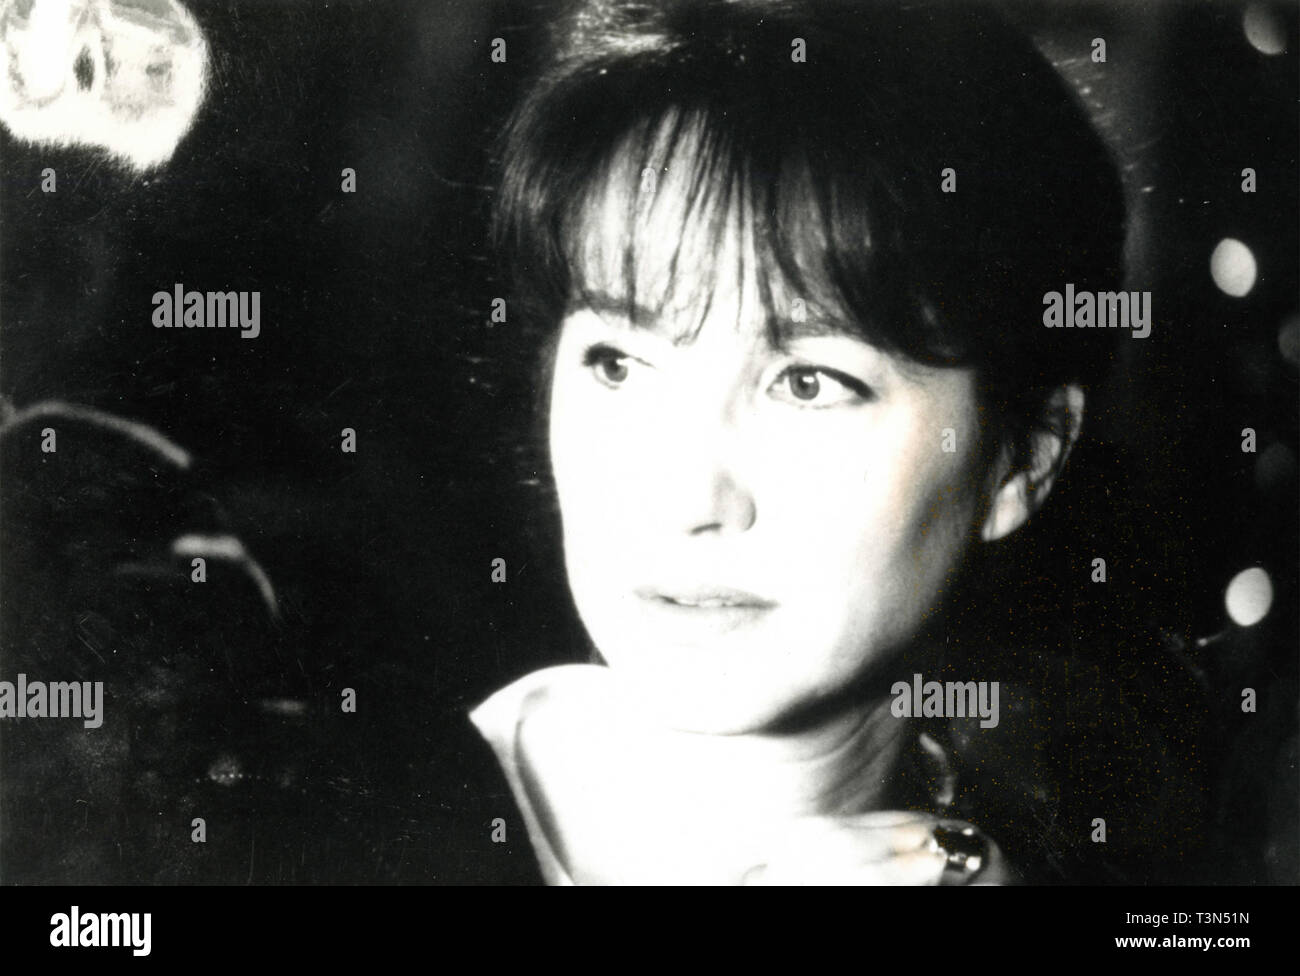 French actress Nathalie Baye in the movie The Lie, 1992 Stock Photo